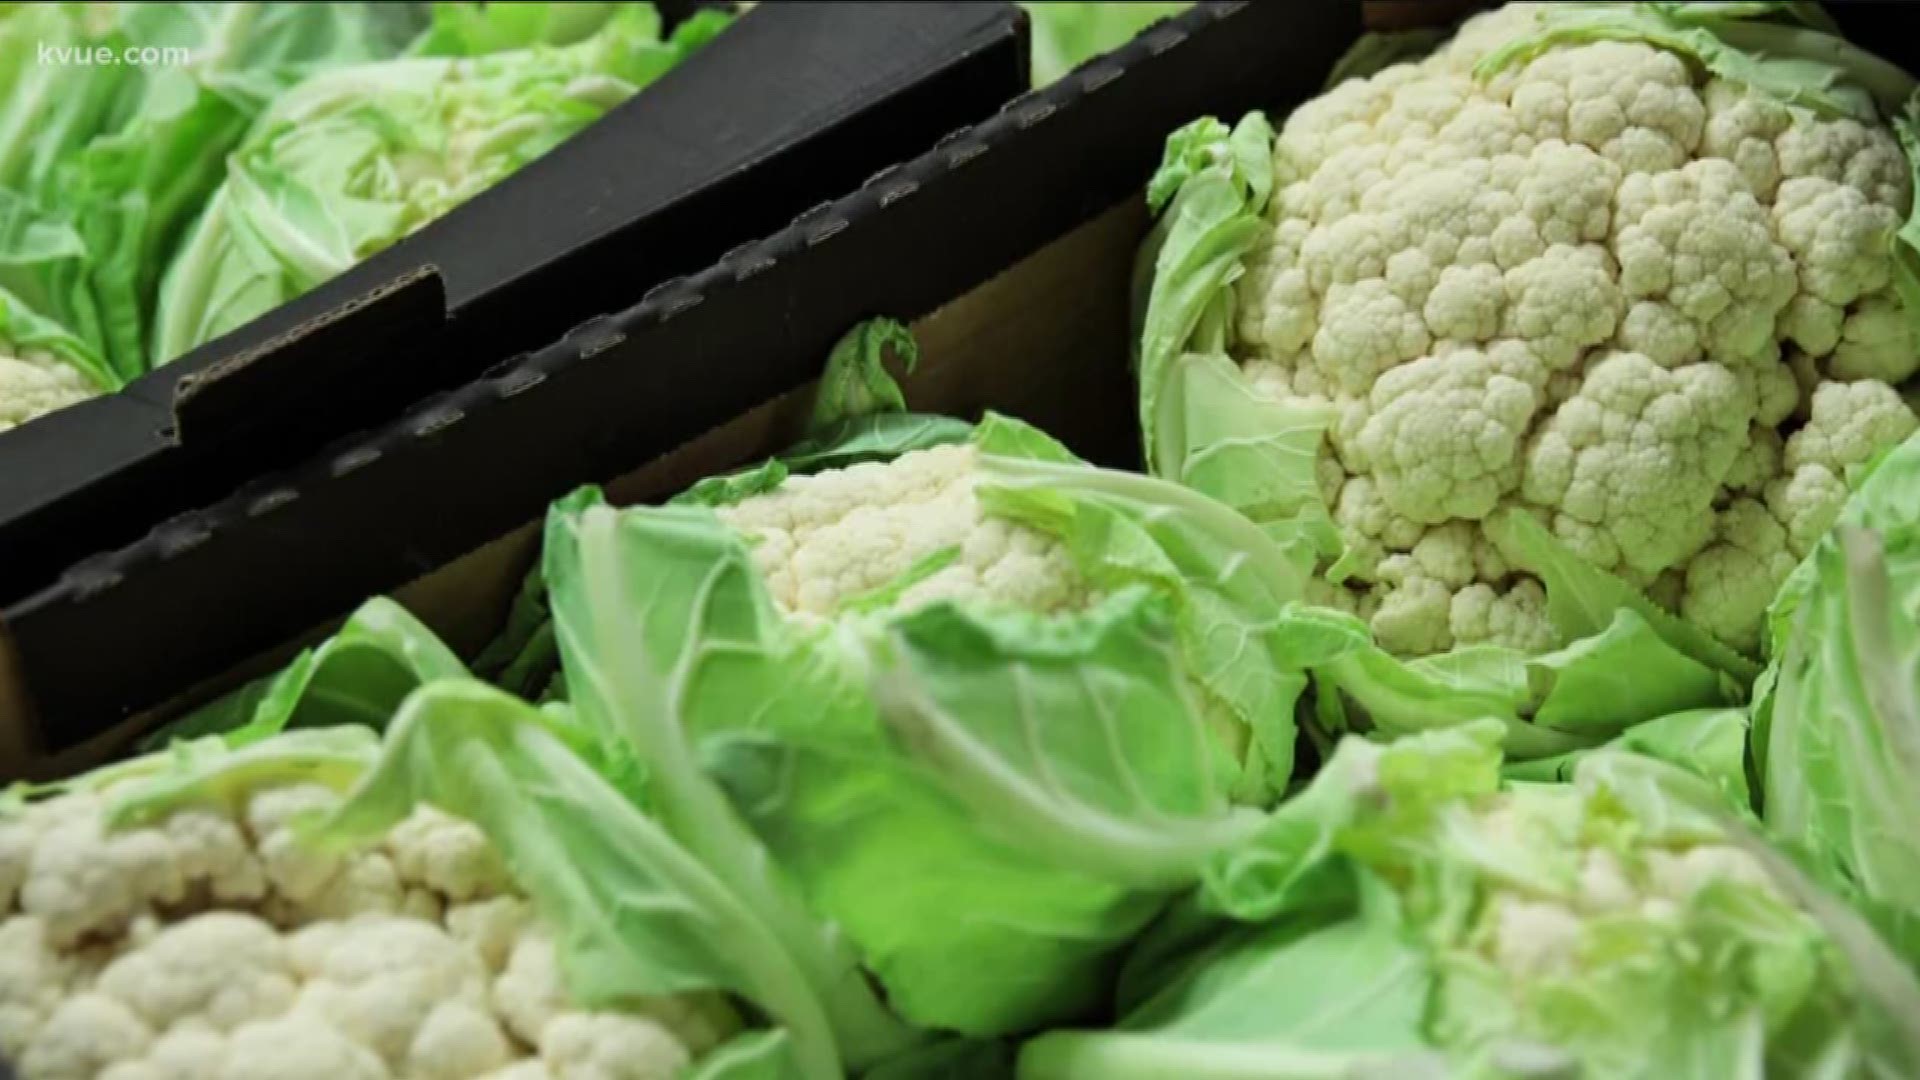 The California farm identified as one possible source of an E. coli outbreak that sparked a nationwide recall of romaine lettuce recalled red leaf lettuce, green leaf lettuce and cauliflower on Thursday.